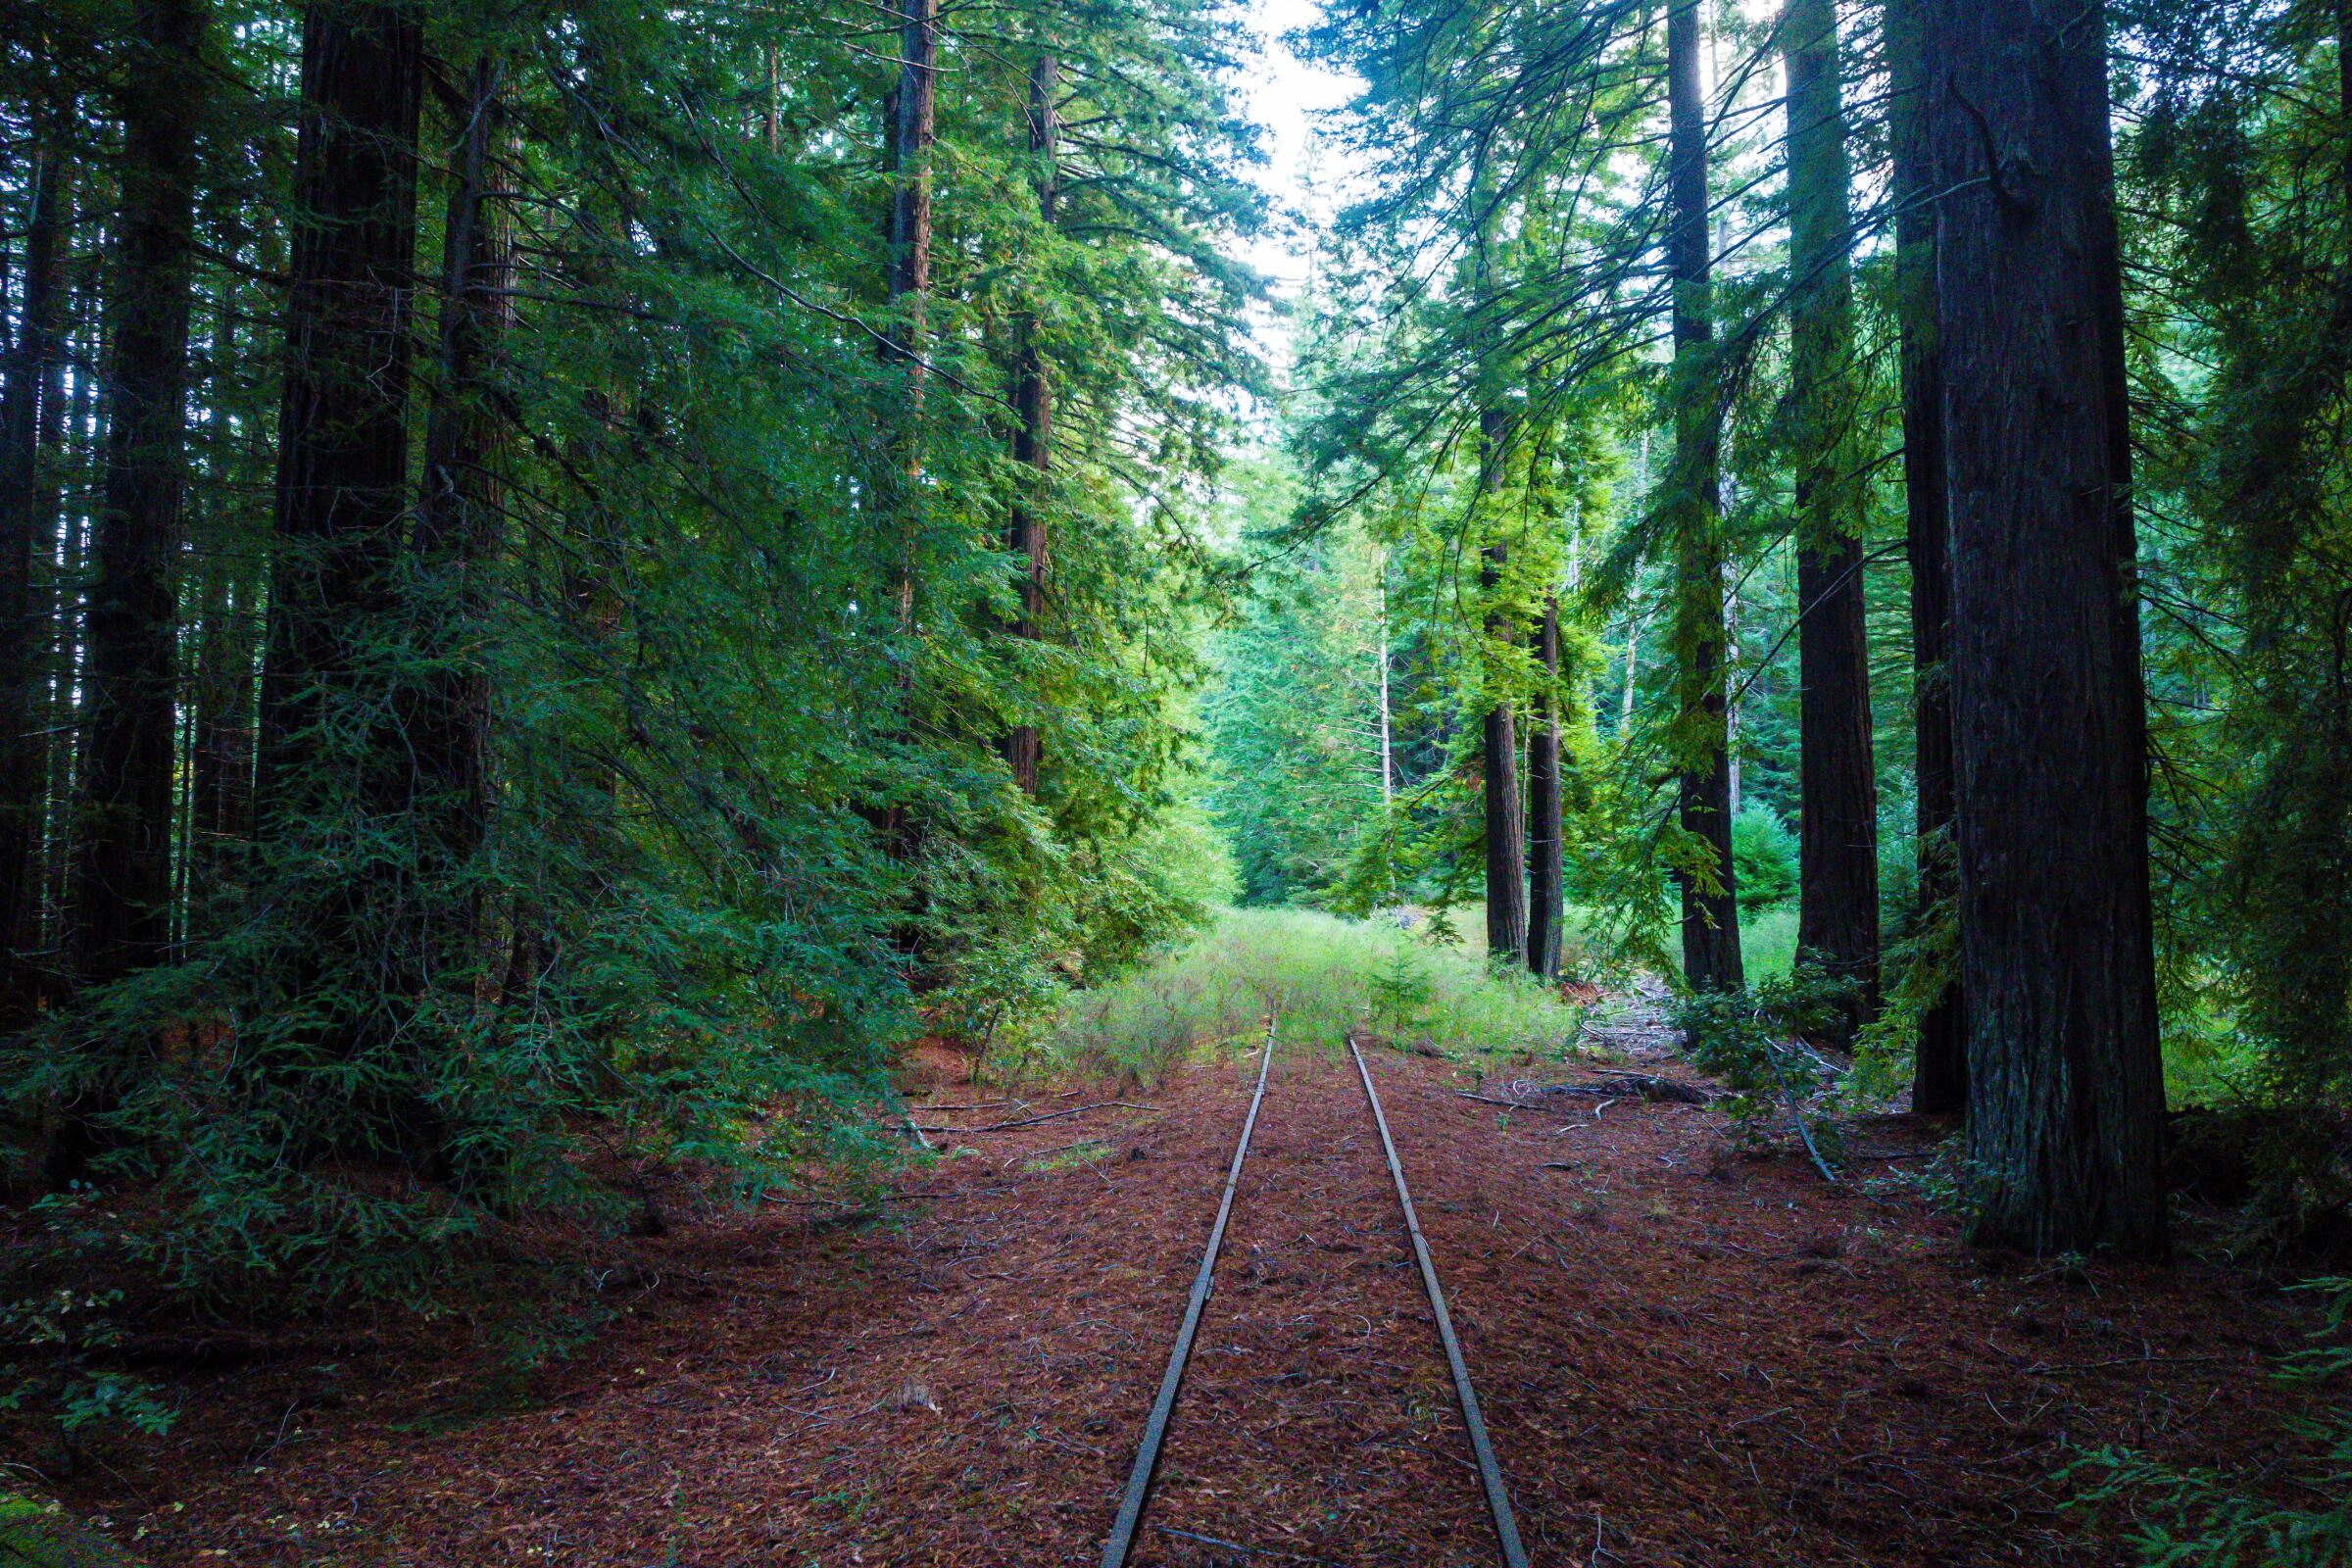 Scenery along the future trail includes tall coast redwoods